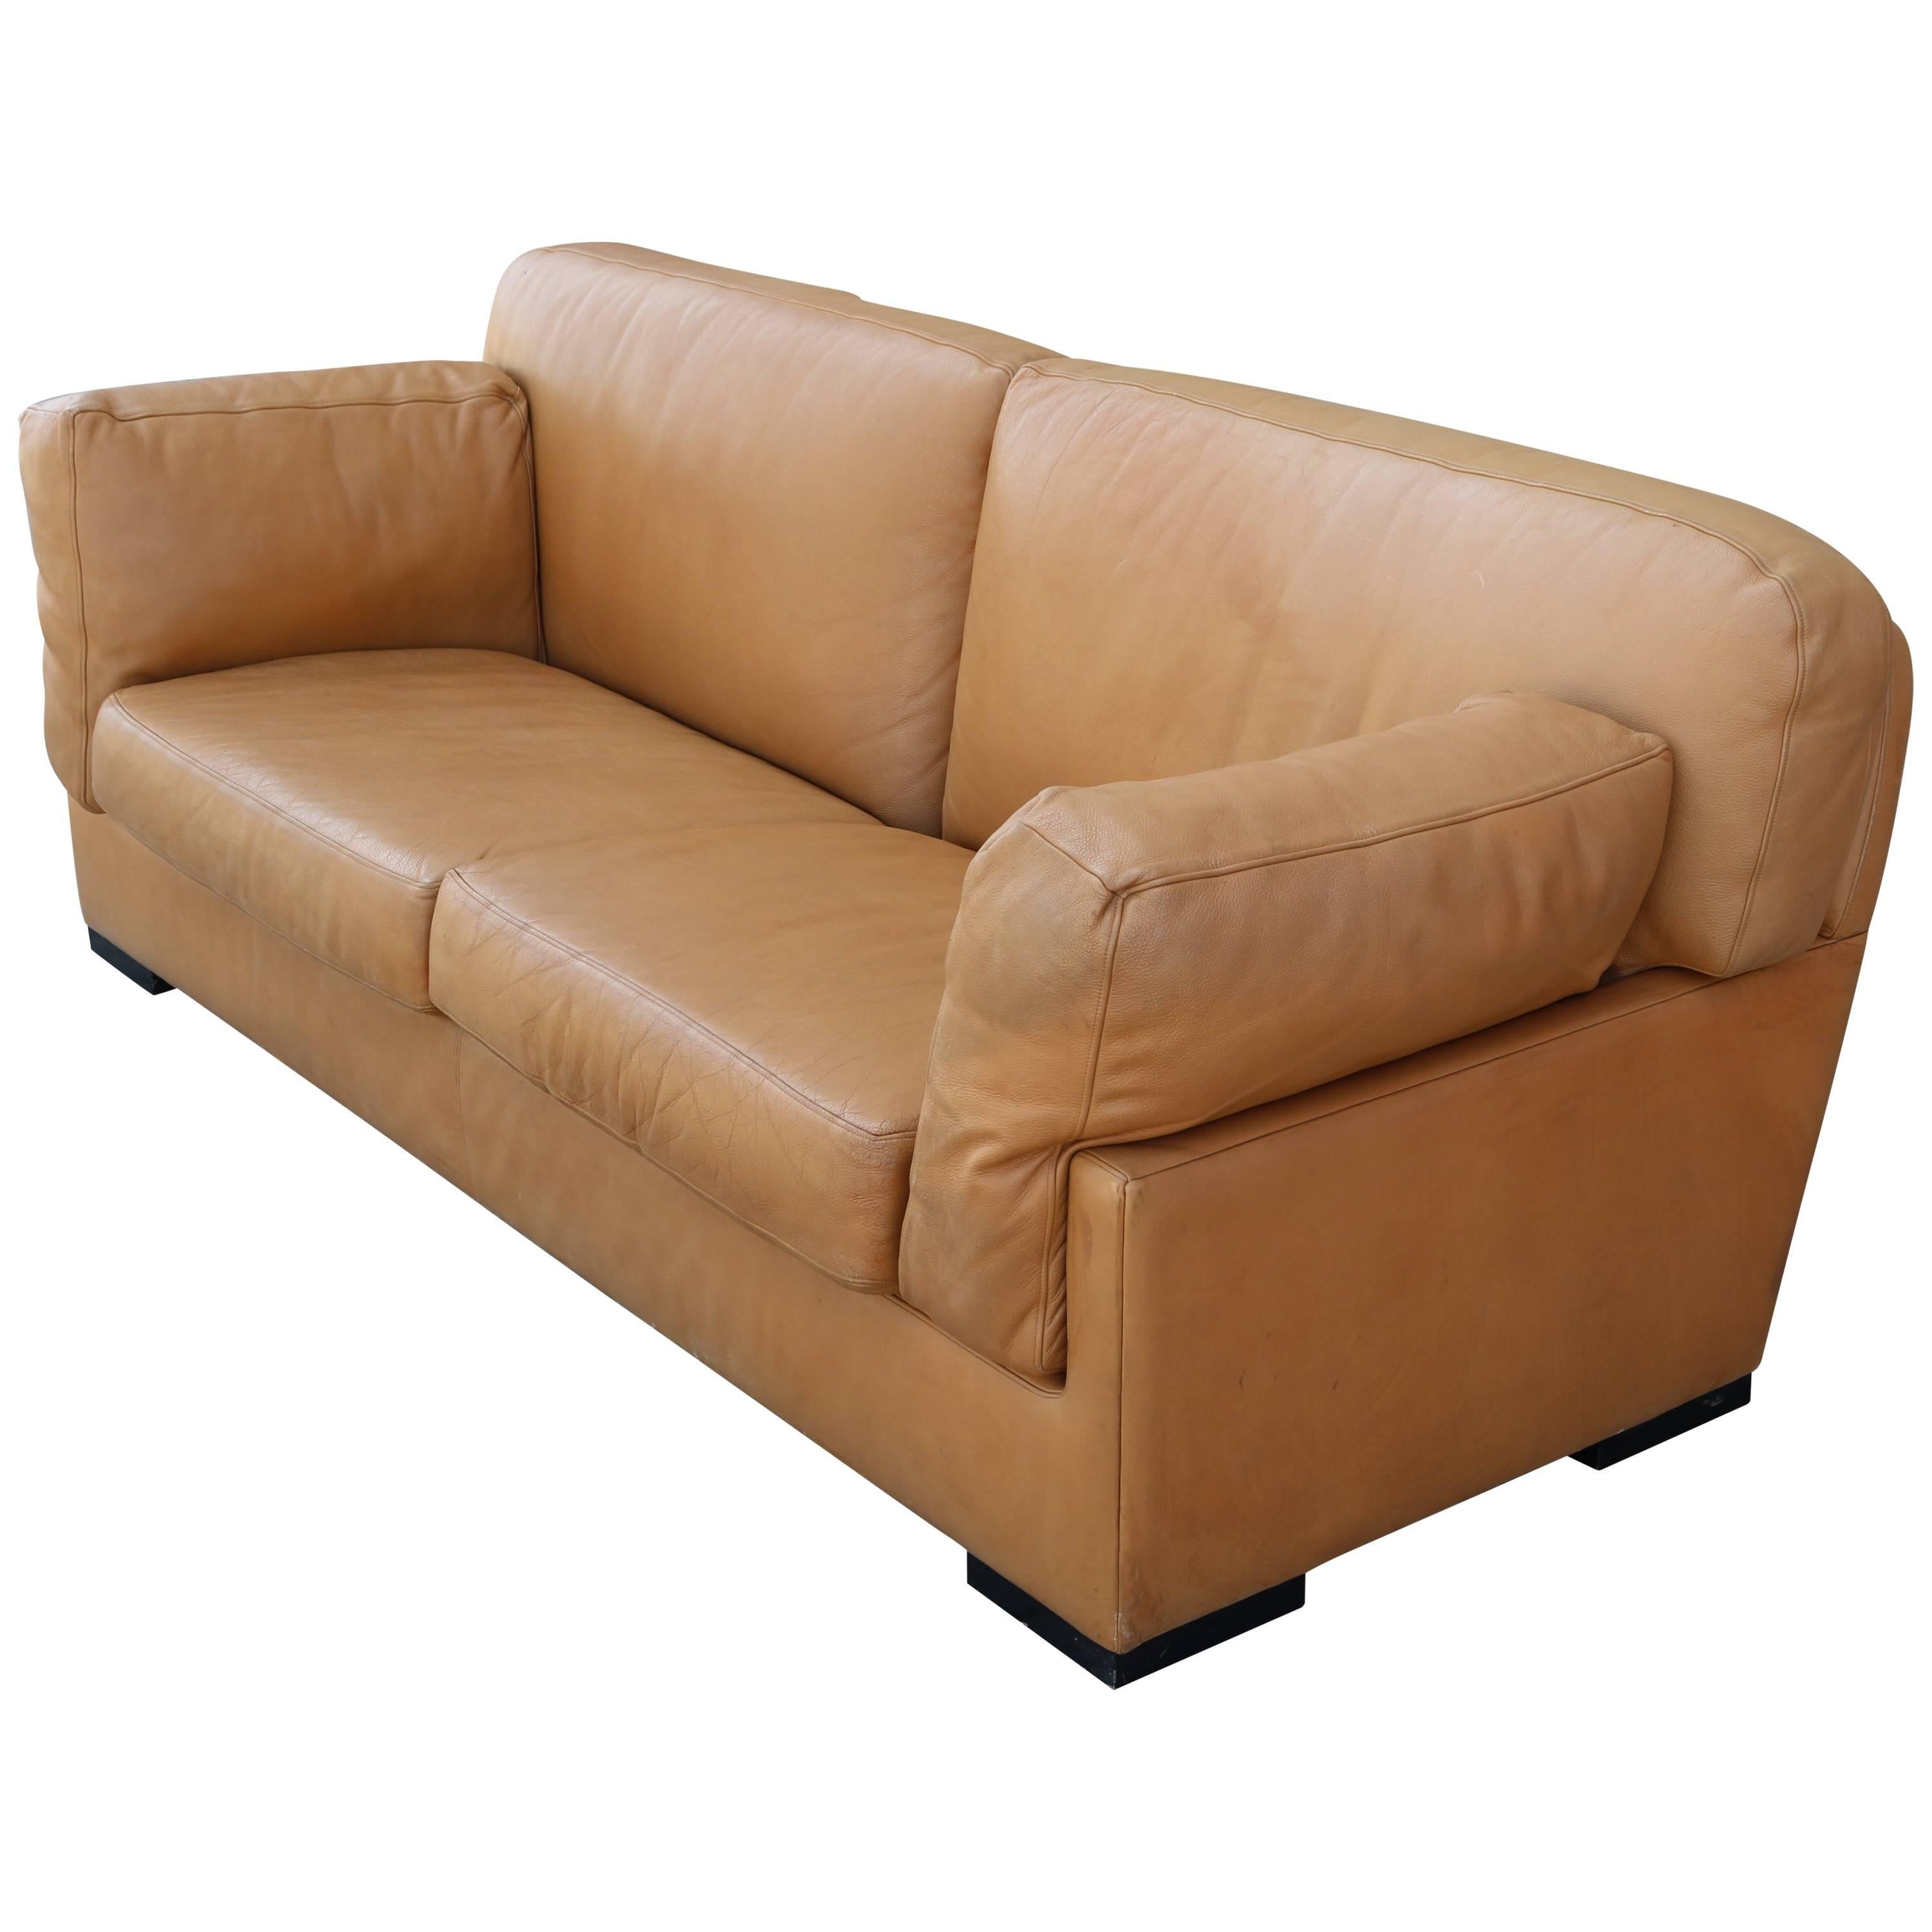 1970s Butterscotch Leather Sofa